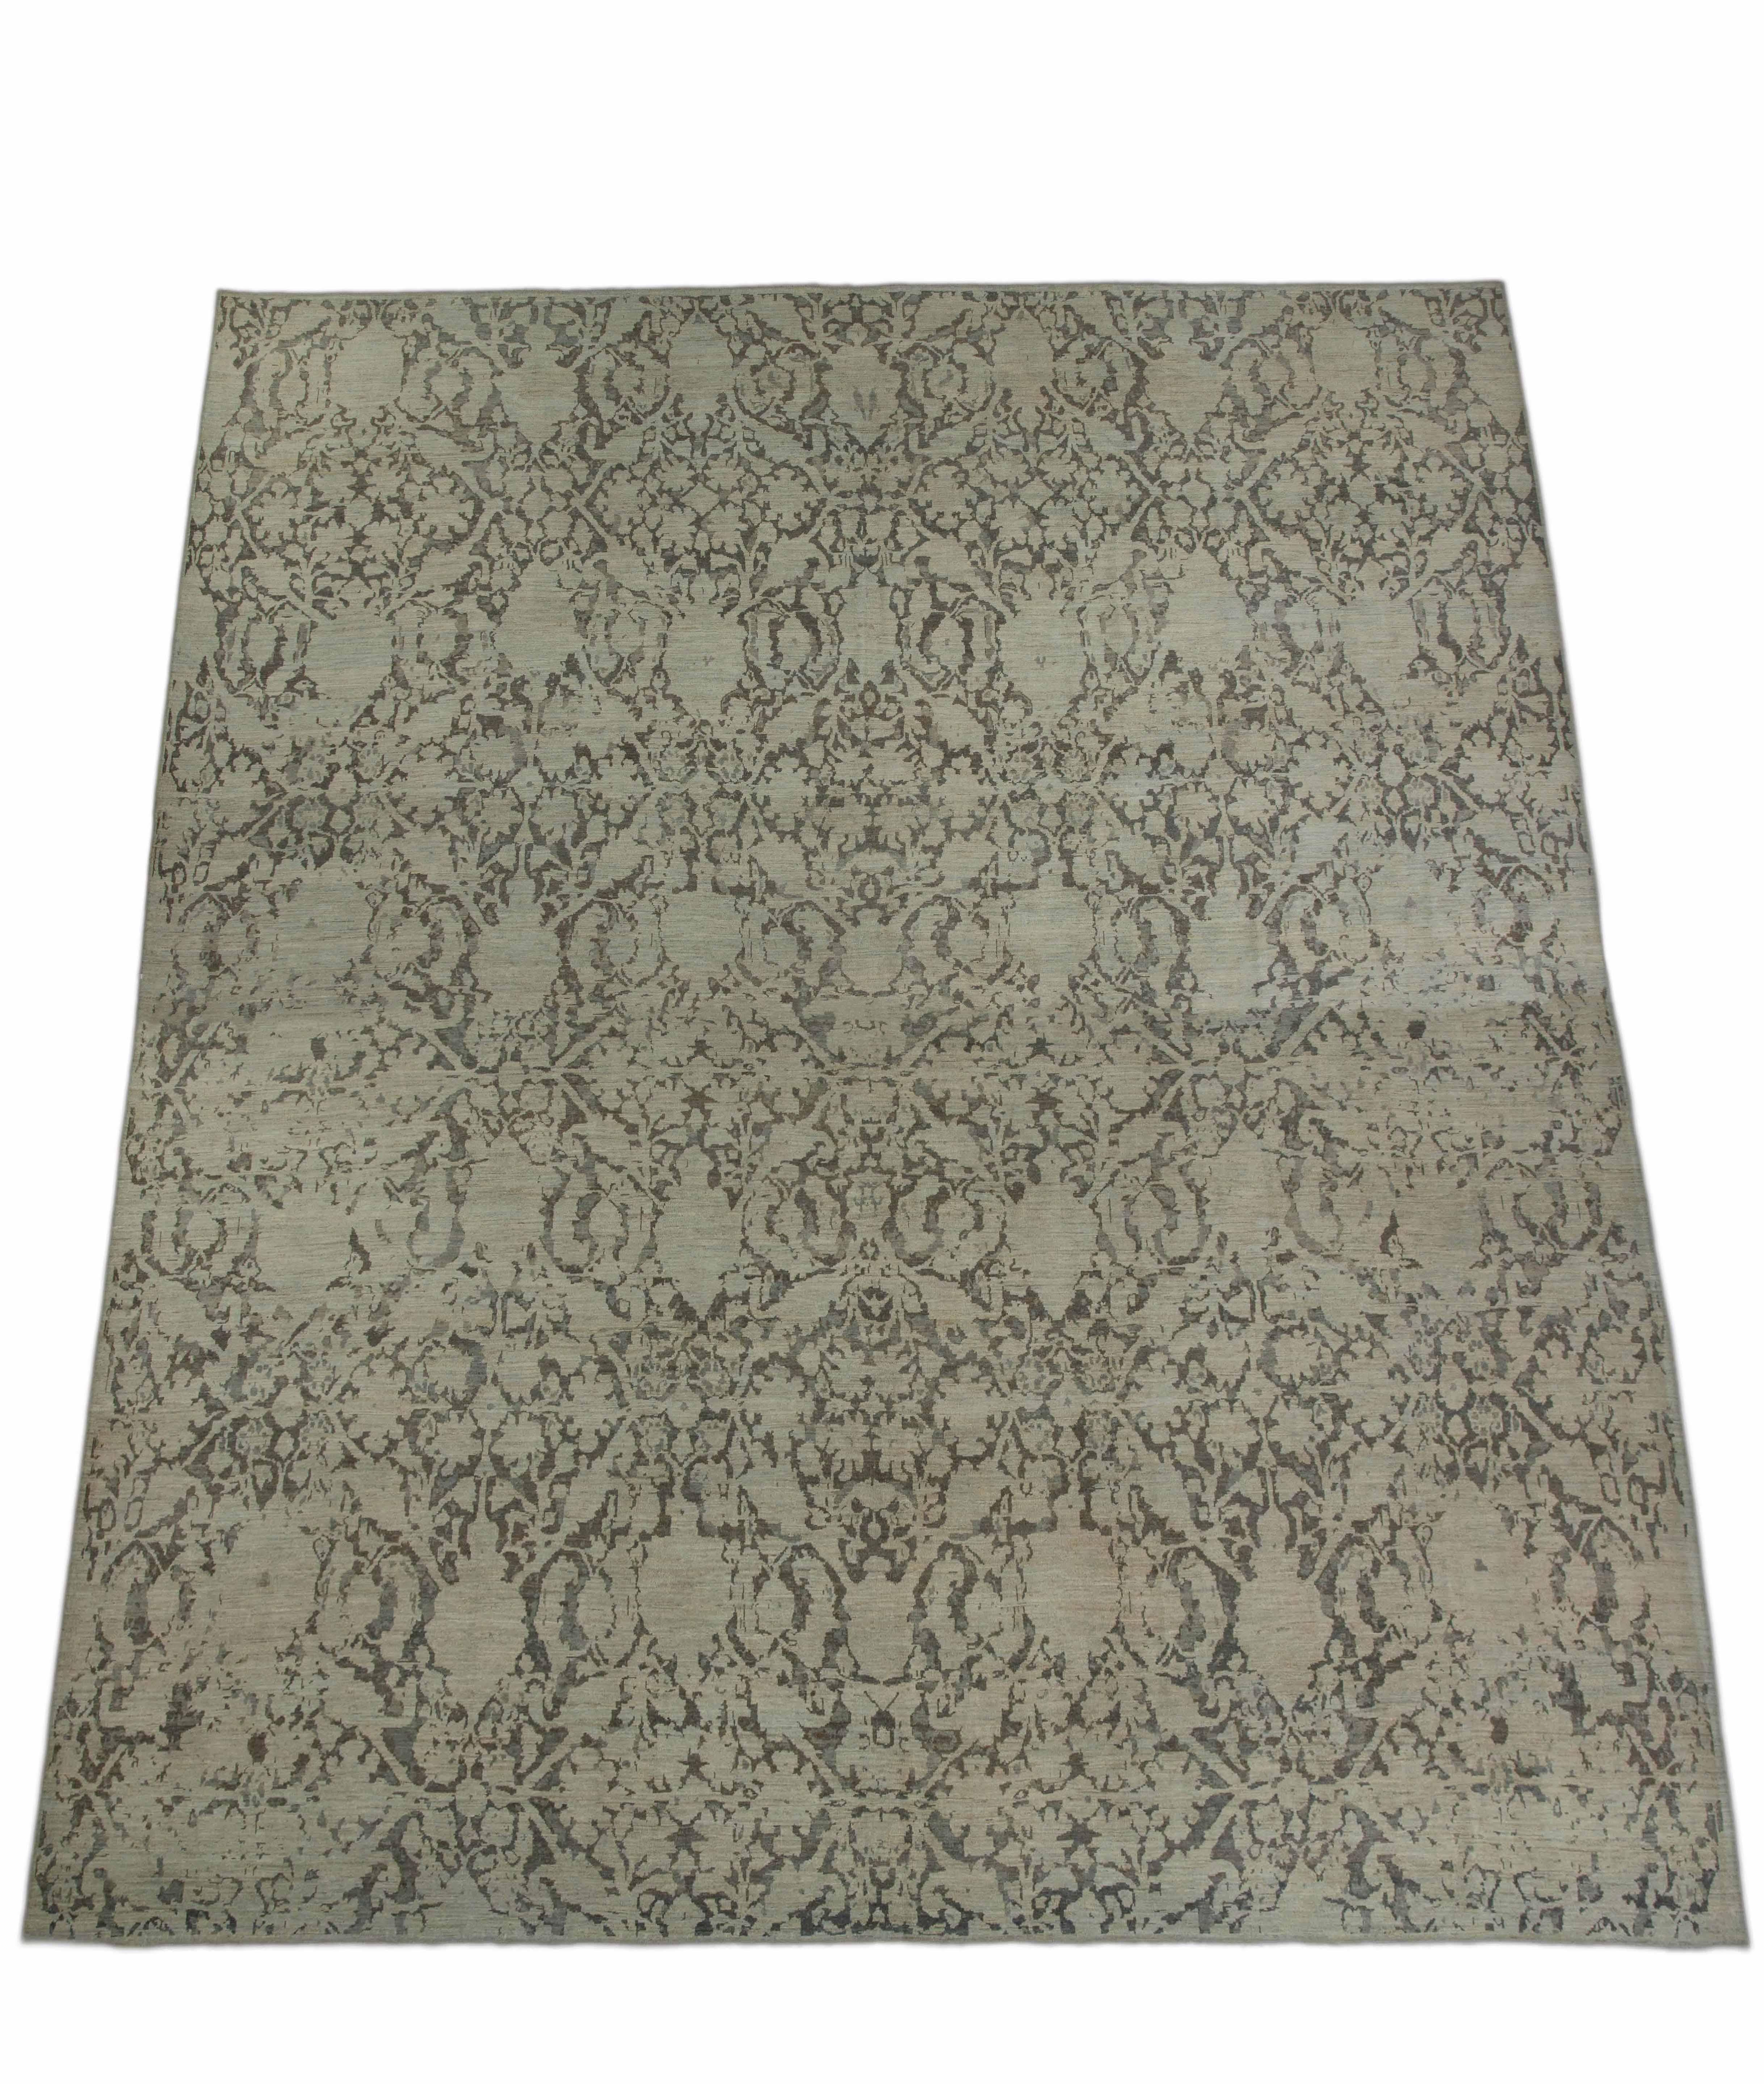 Handmade Turkish area rug from high quality sheep’s wool and colored with eco-friendly vegetable dyes that are proven safe for humans and pets alike. It’s a Classic Sultanabad design showcasing bold black flower patterns over a beige field. It’s a